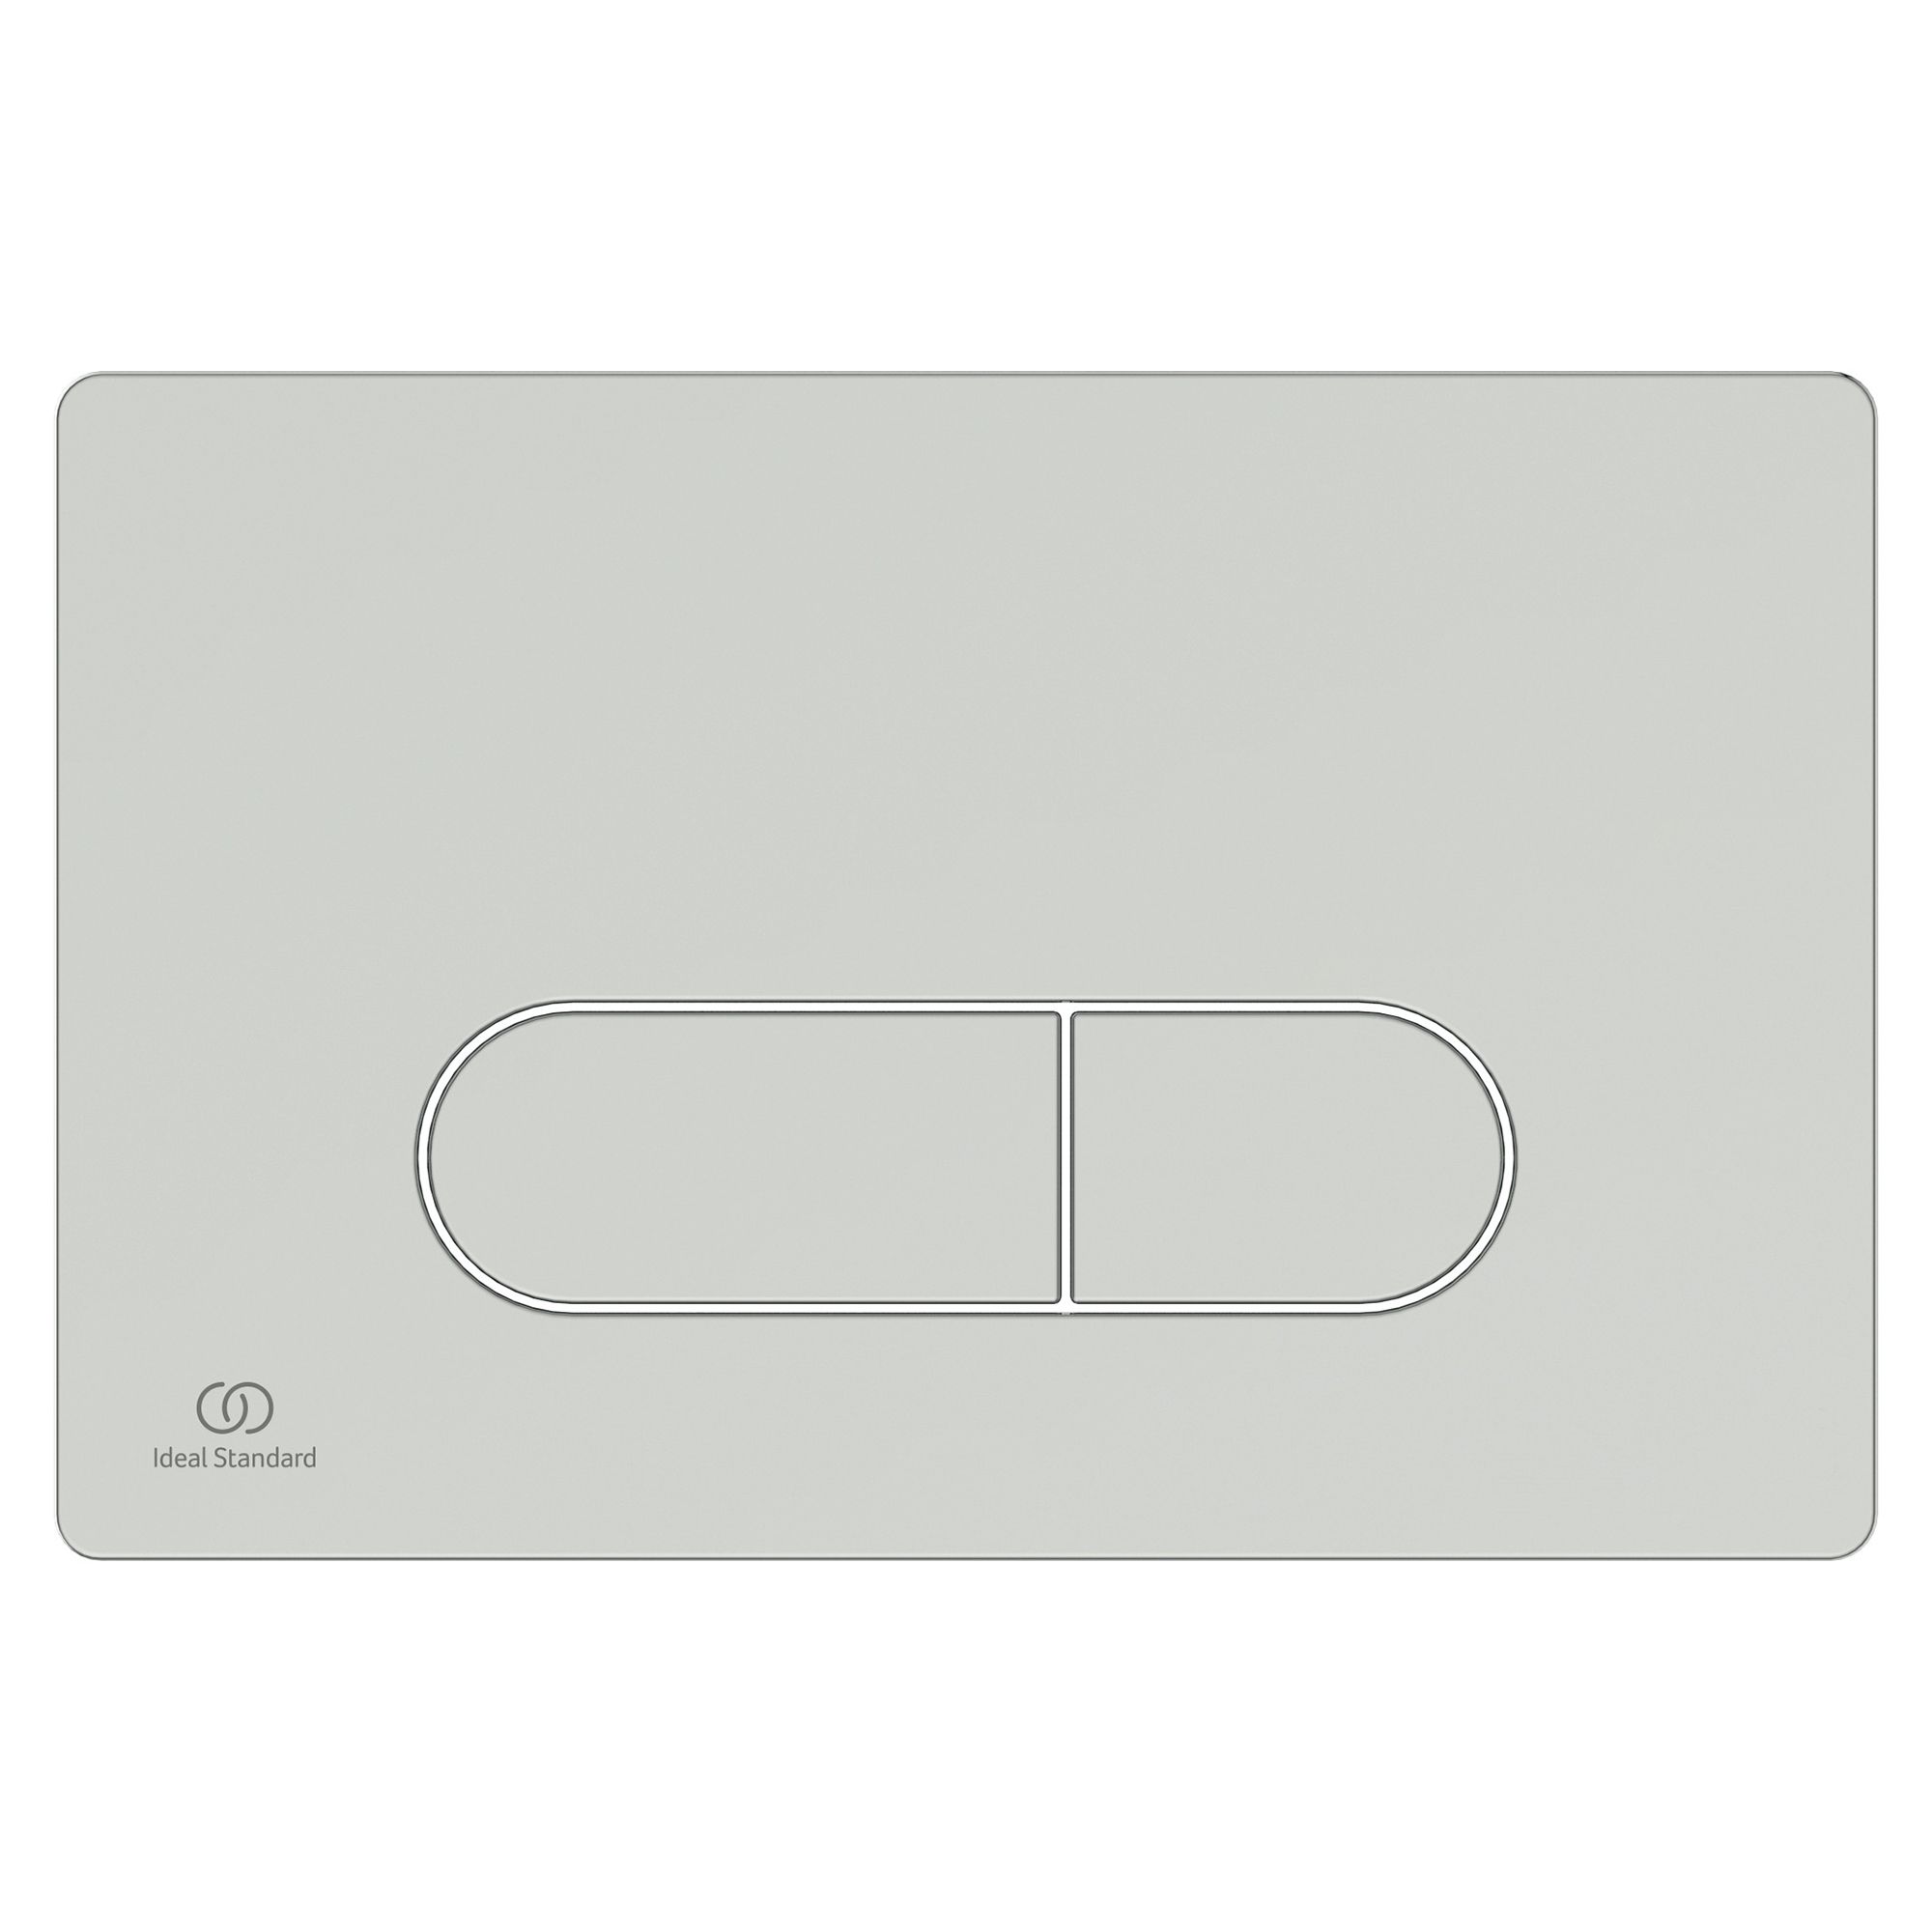 Ideal Standard Oleas P1 Chrome effect Wall-mounted Dual Flushing plate (H)154mm (W)234mm